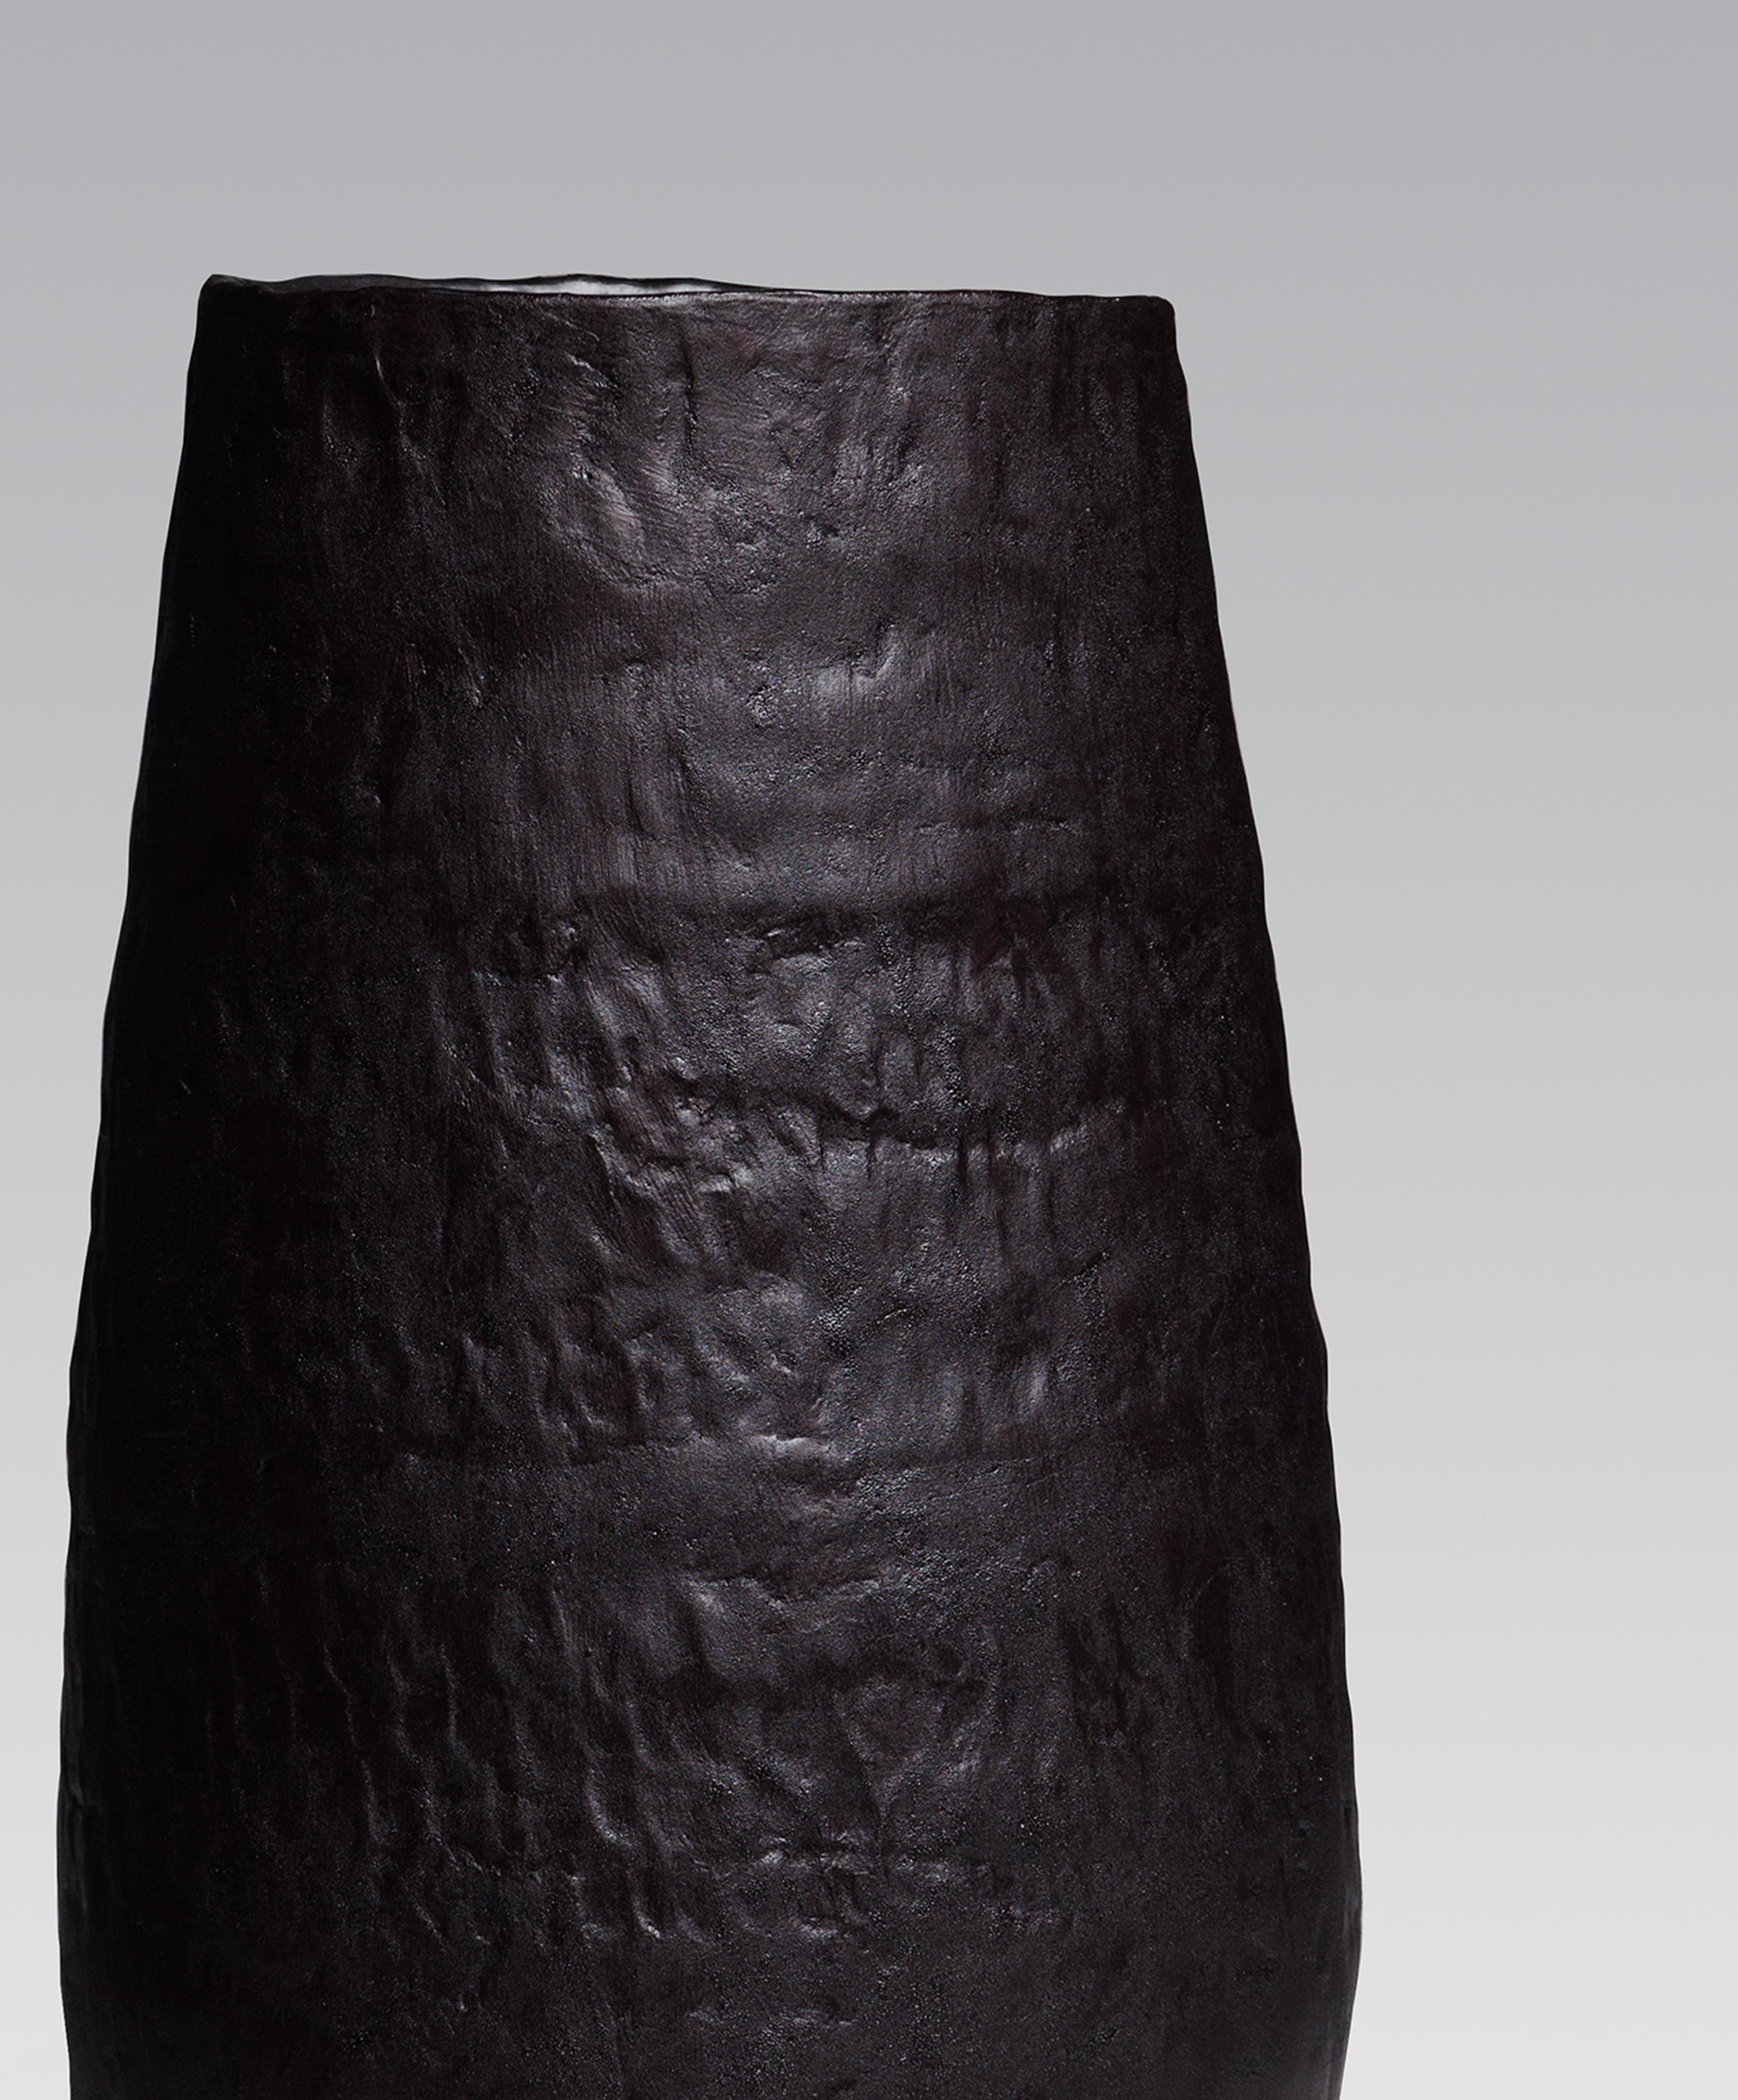 ObscuroBV05 Large vase designed and produced by Canadian artist Pascale Girardin features a partially glazed stoneware body. The entire structure is handmade. The handprints sculptured in the body are outstanding on this series of large-scale